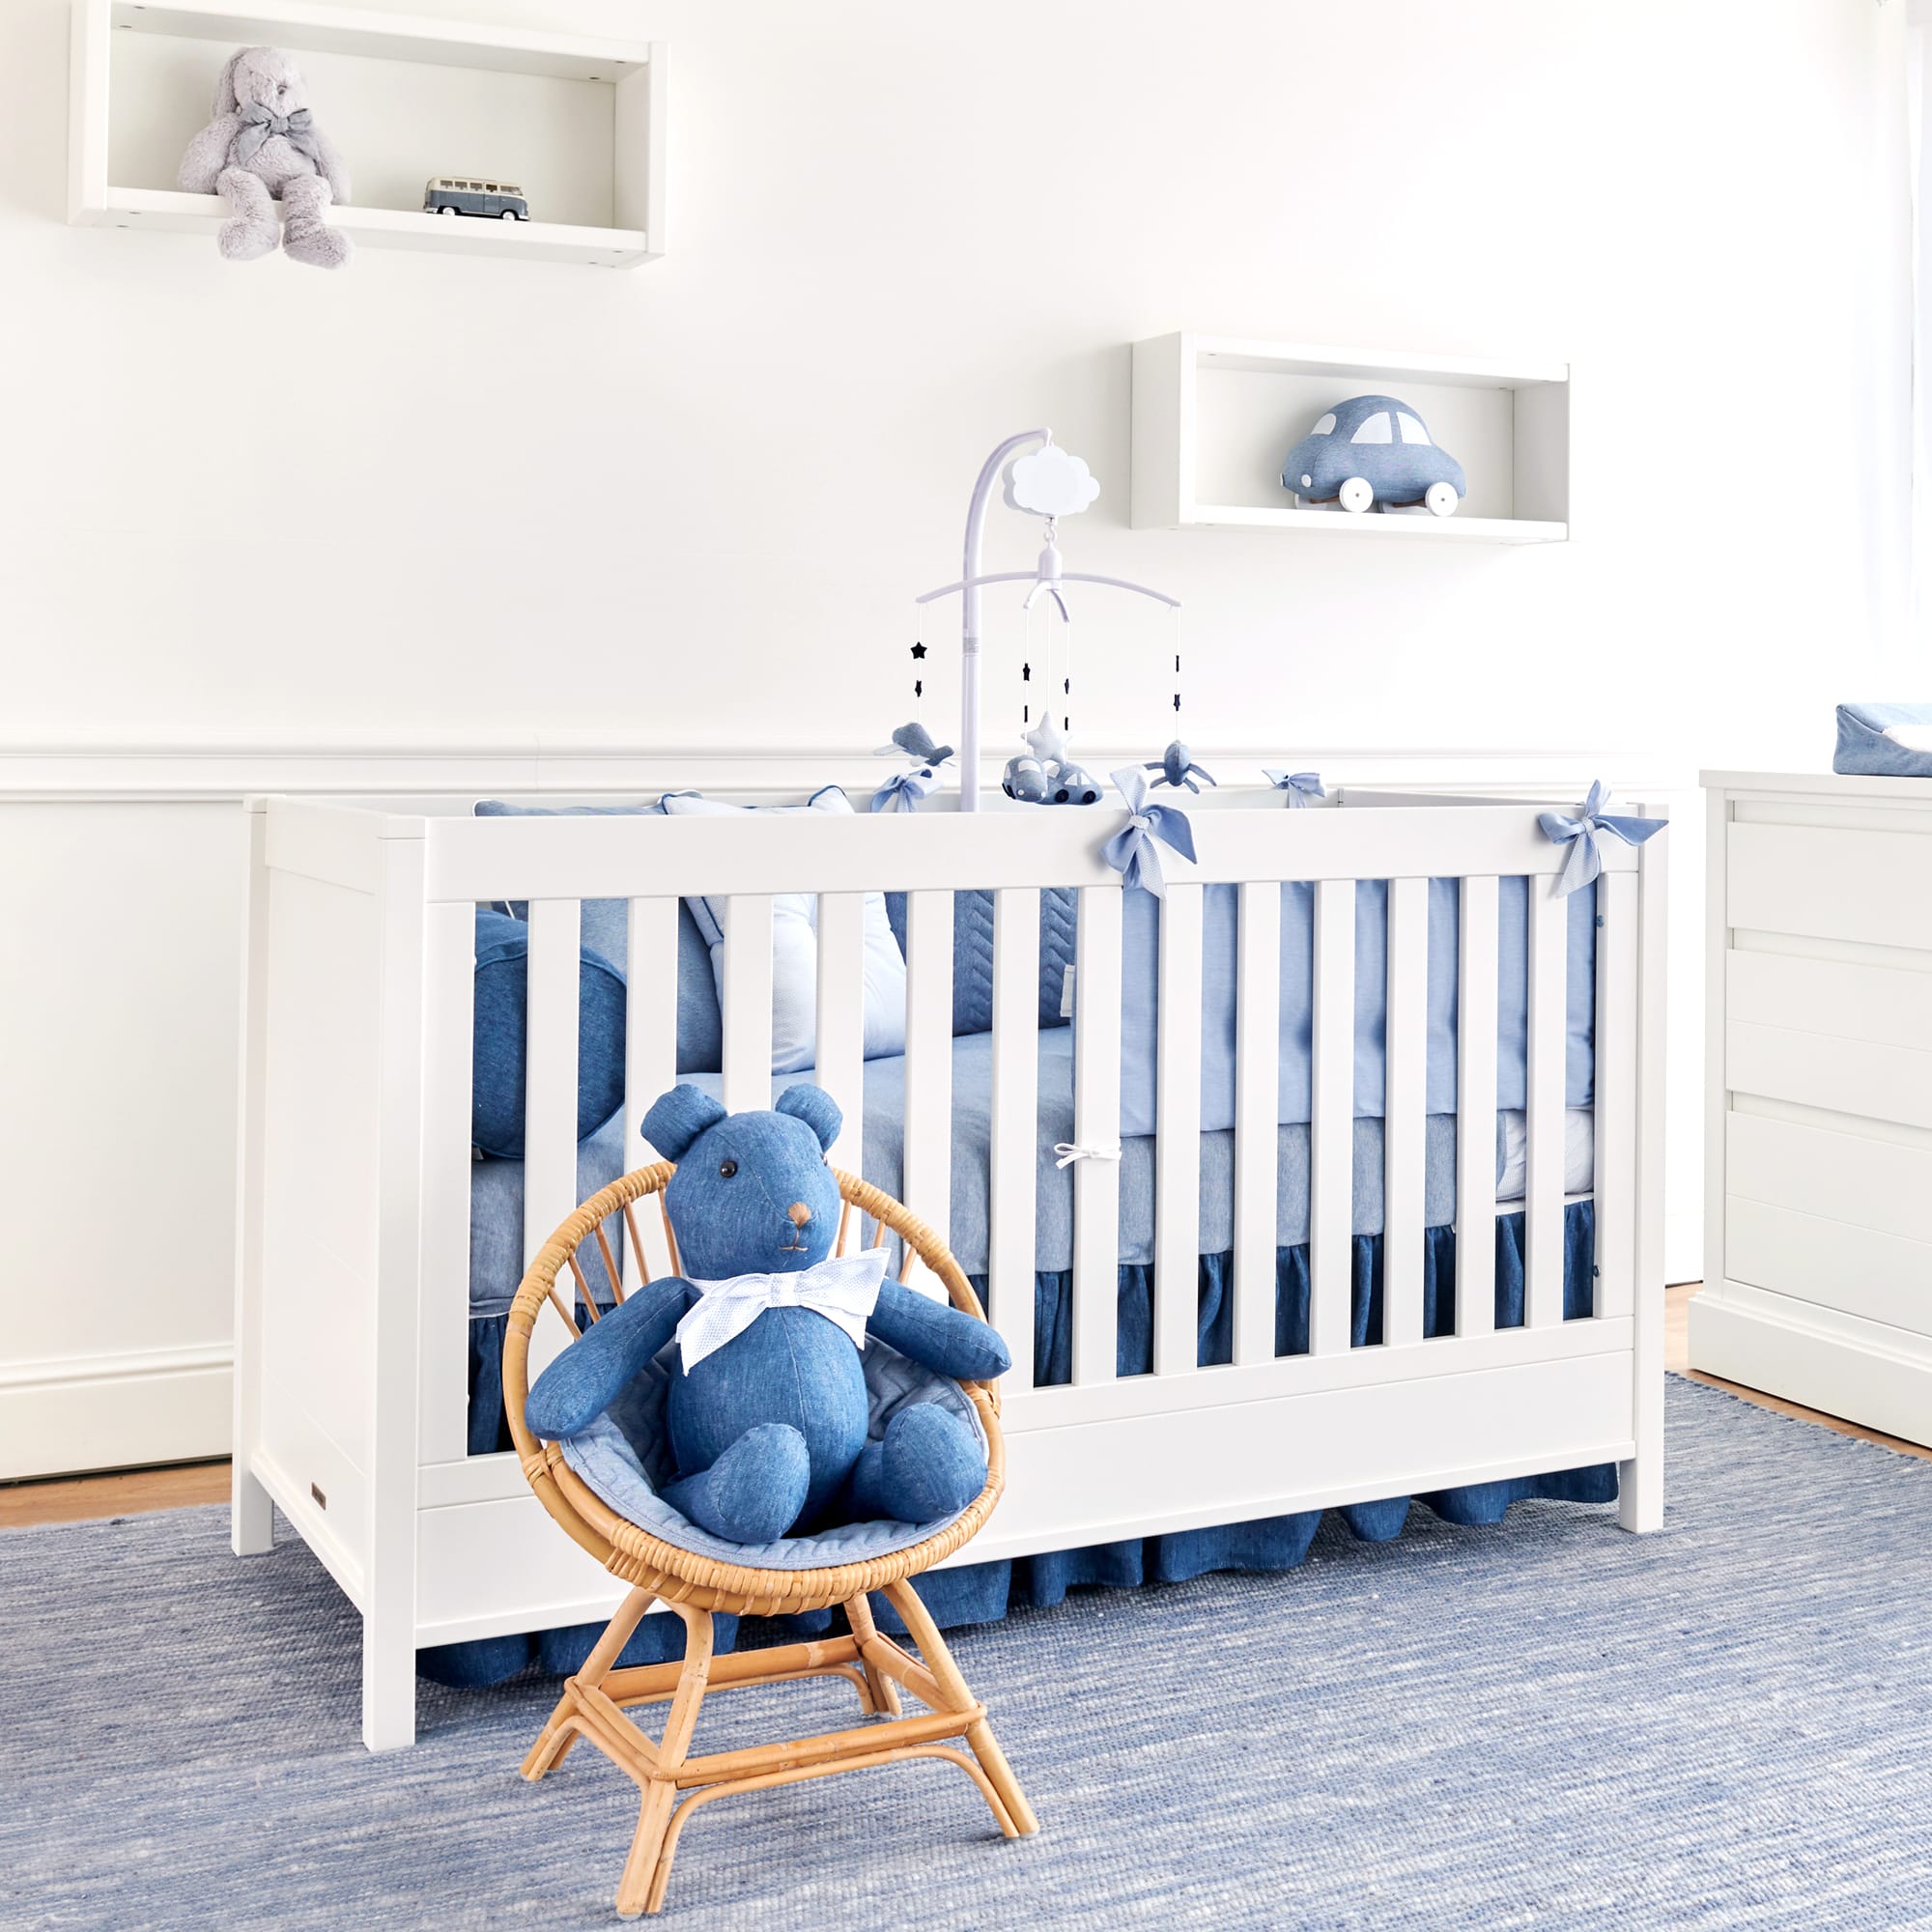 Theophile & Patachou Baby Cot Bed Design